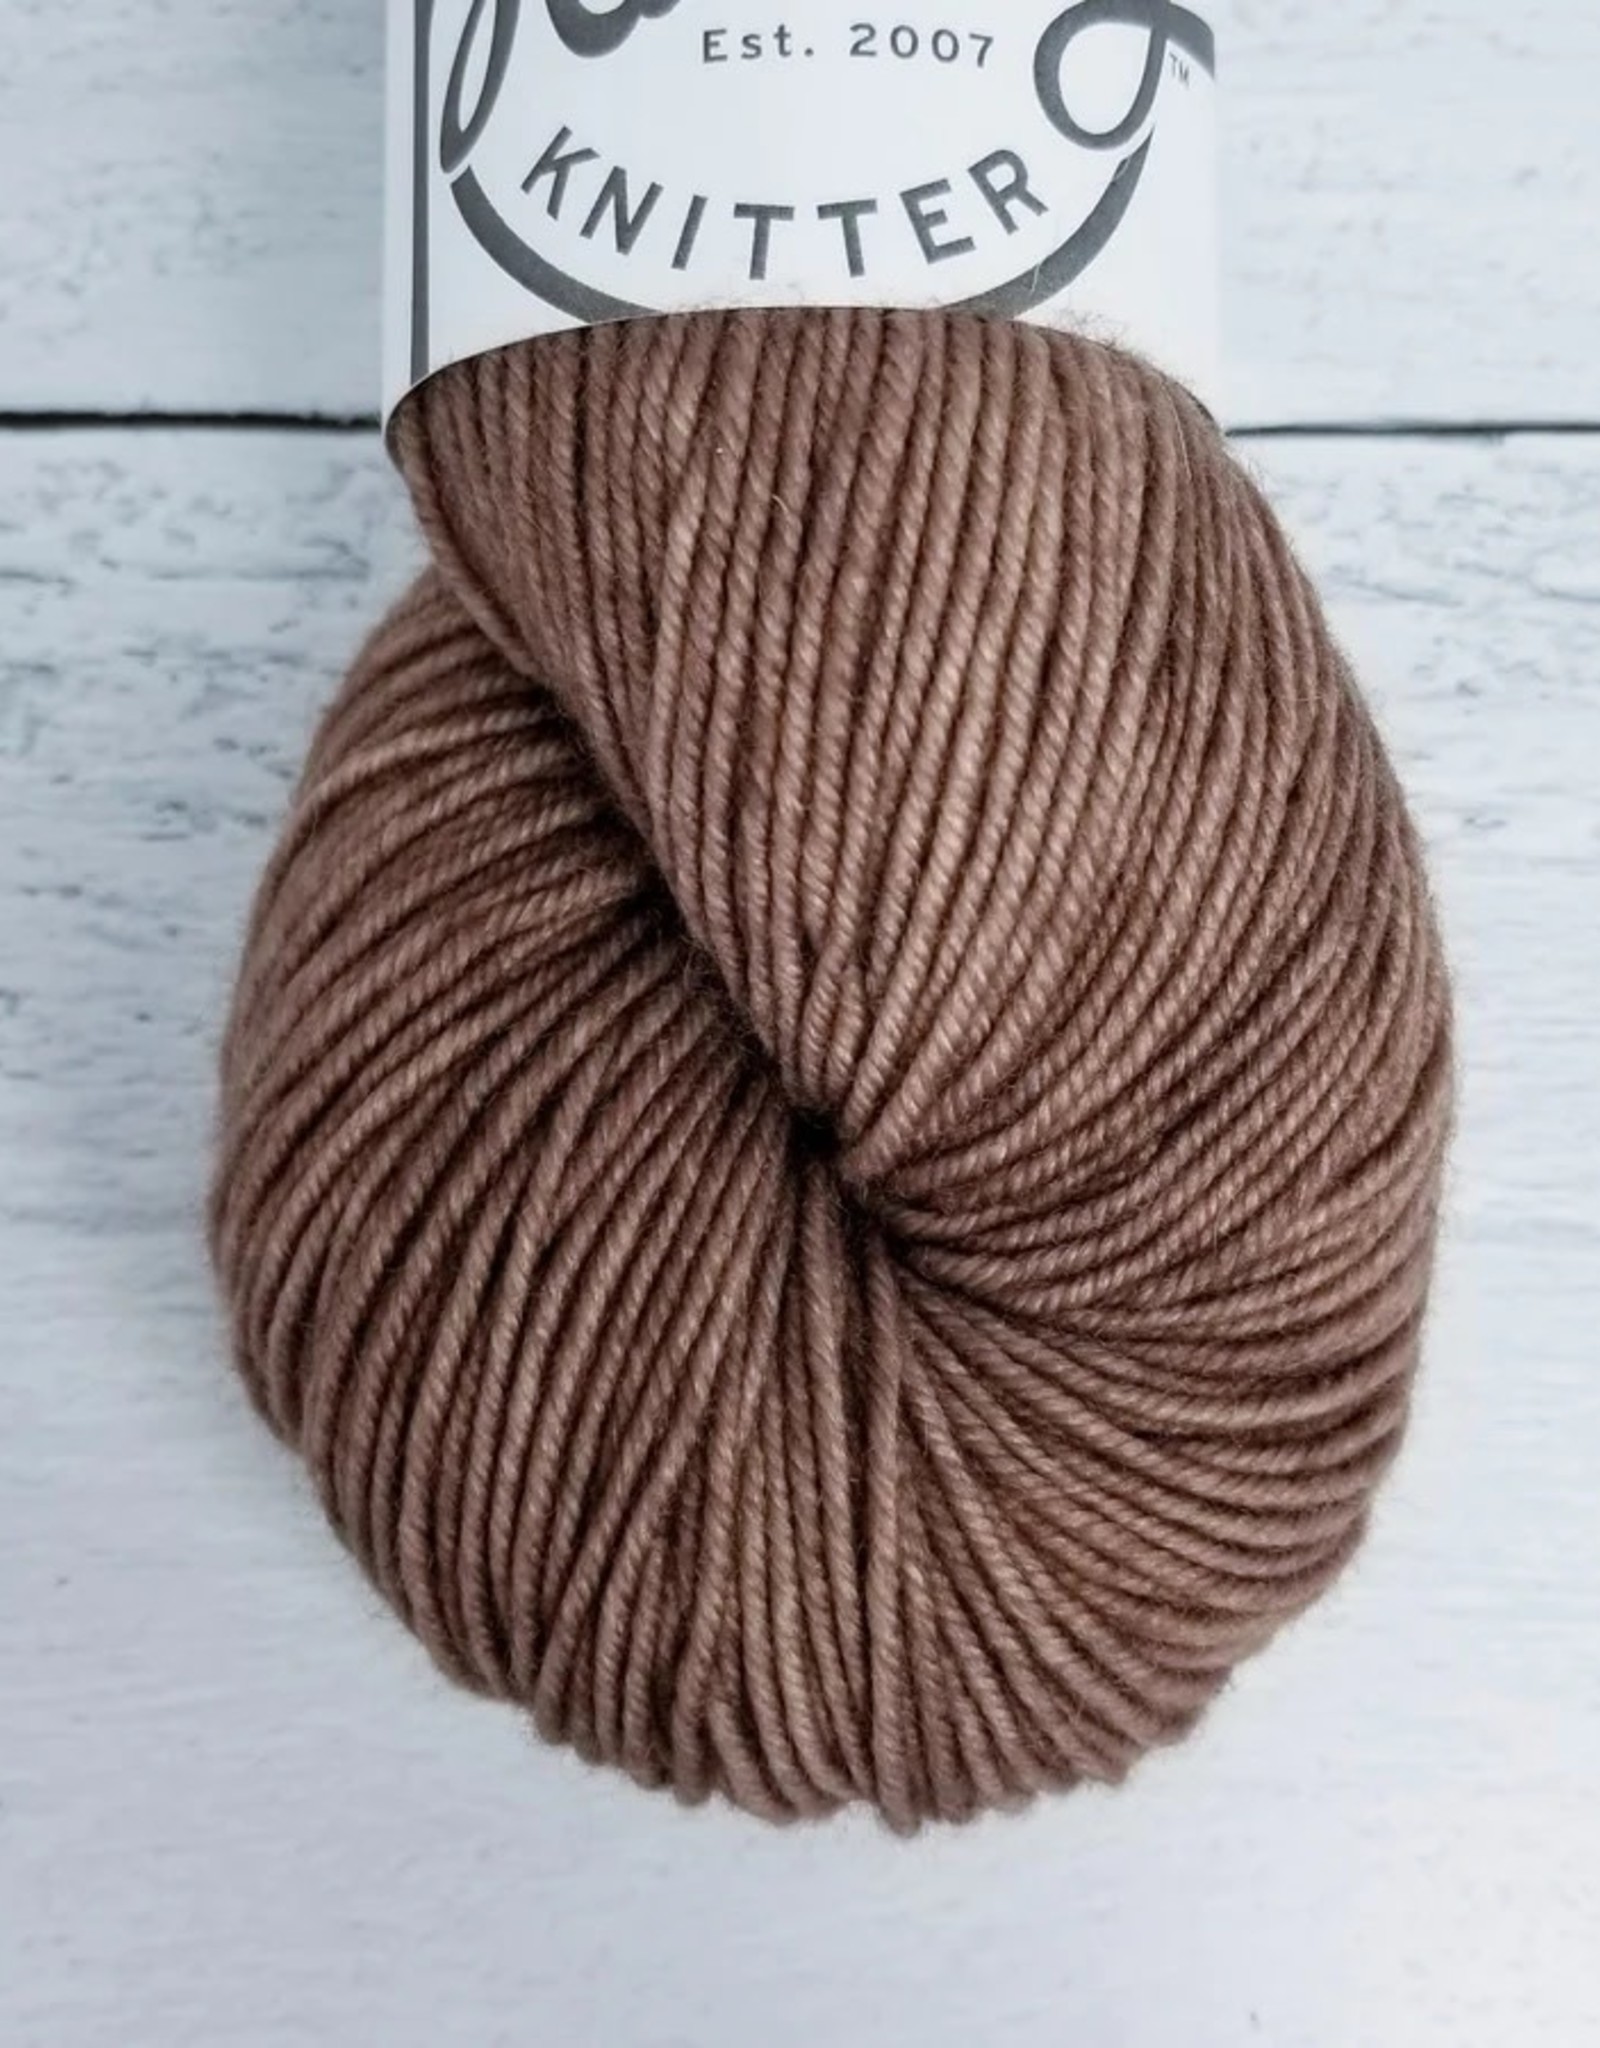 Plucky Knitter Primo DK indy silhouette